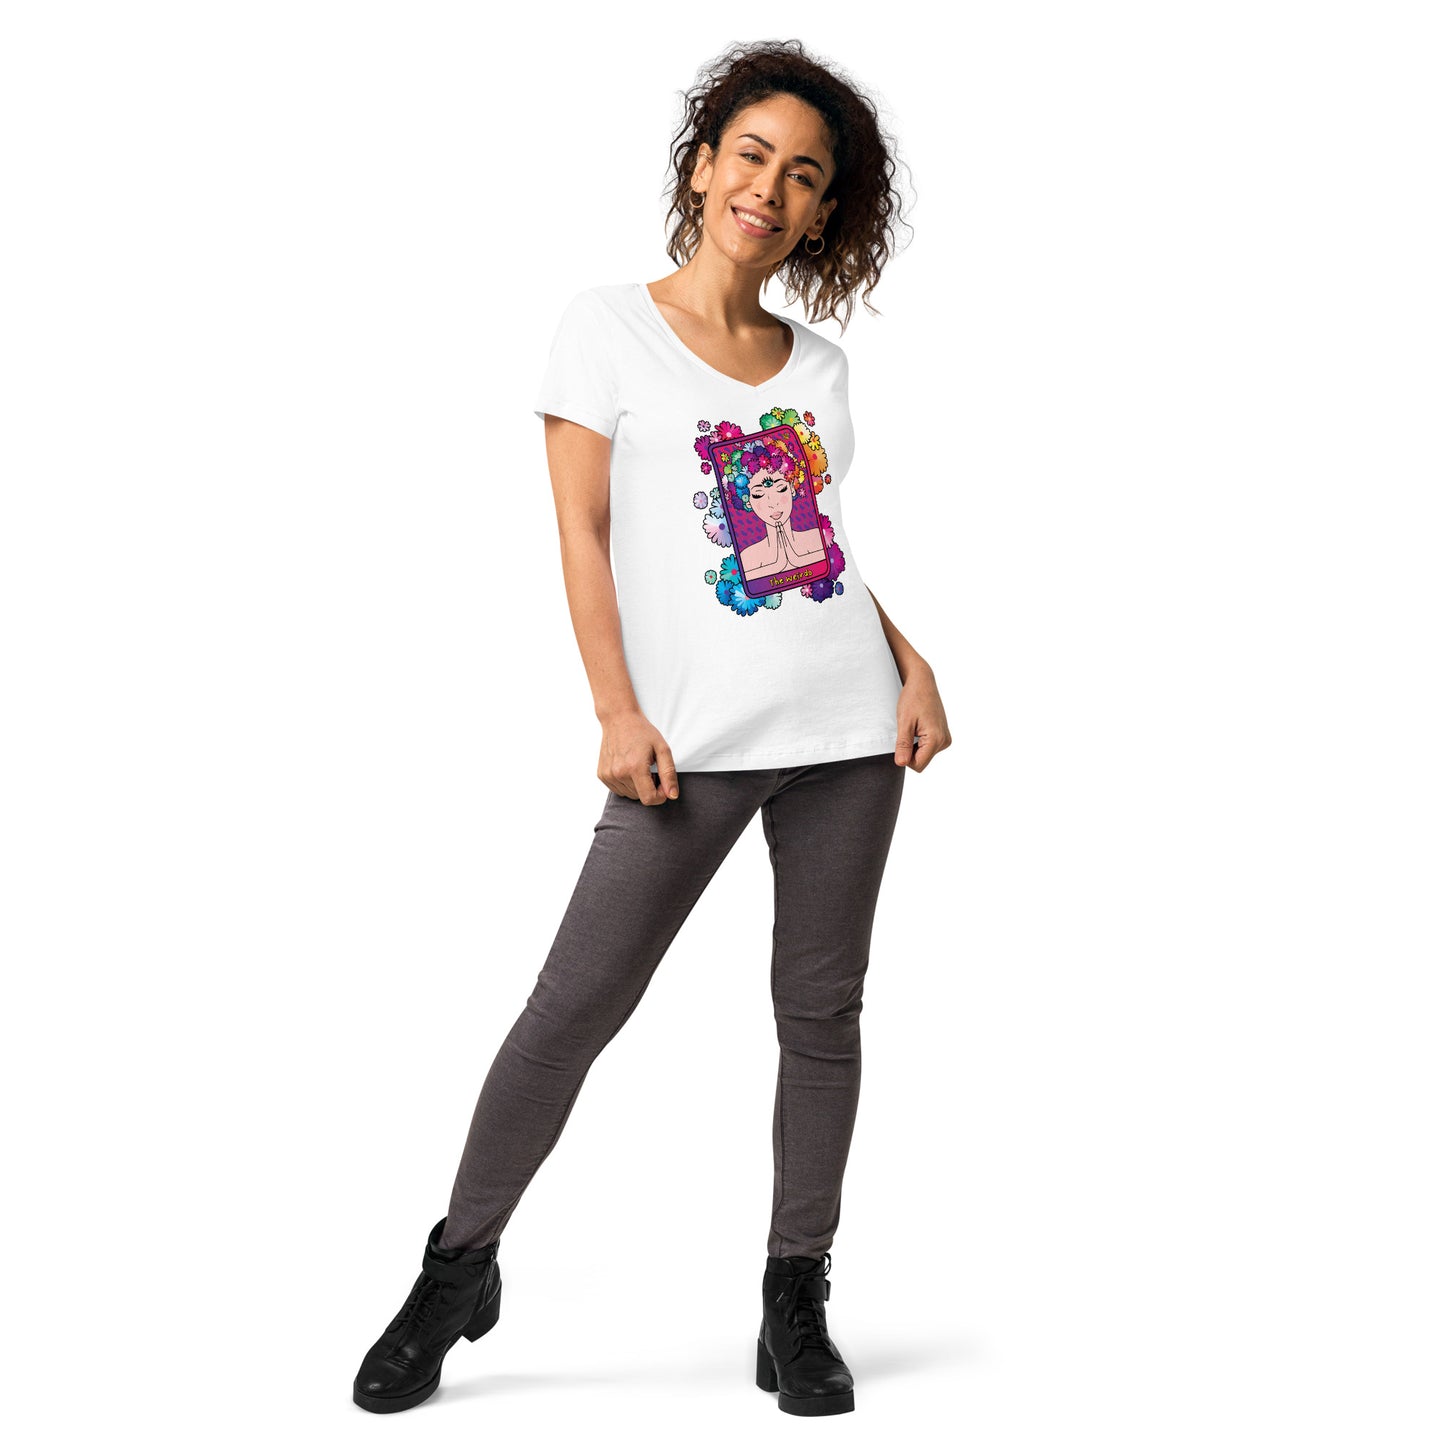 #WEIRDO | Awesome weird T-shirt for spiritual people who read Tarot Cards! The Tarot Card displayed at the front of this V-neck T-shirt is 'The Weirdo.' Cause only weird people will read tarot cards, right?